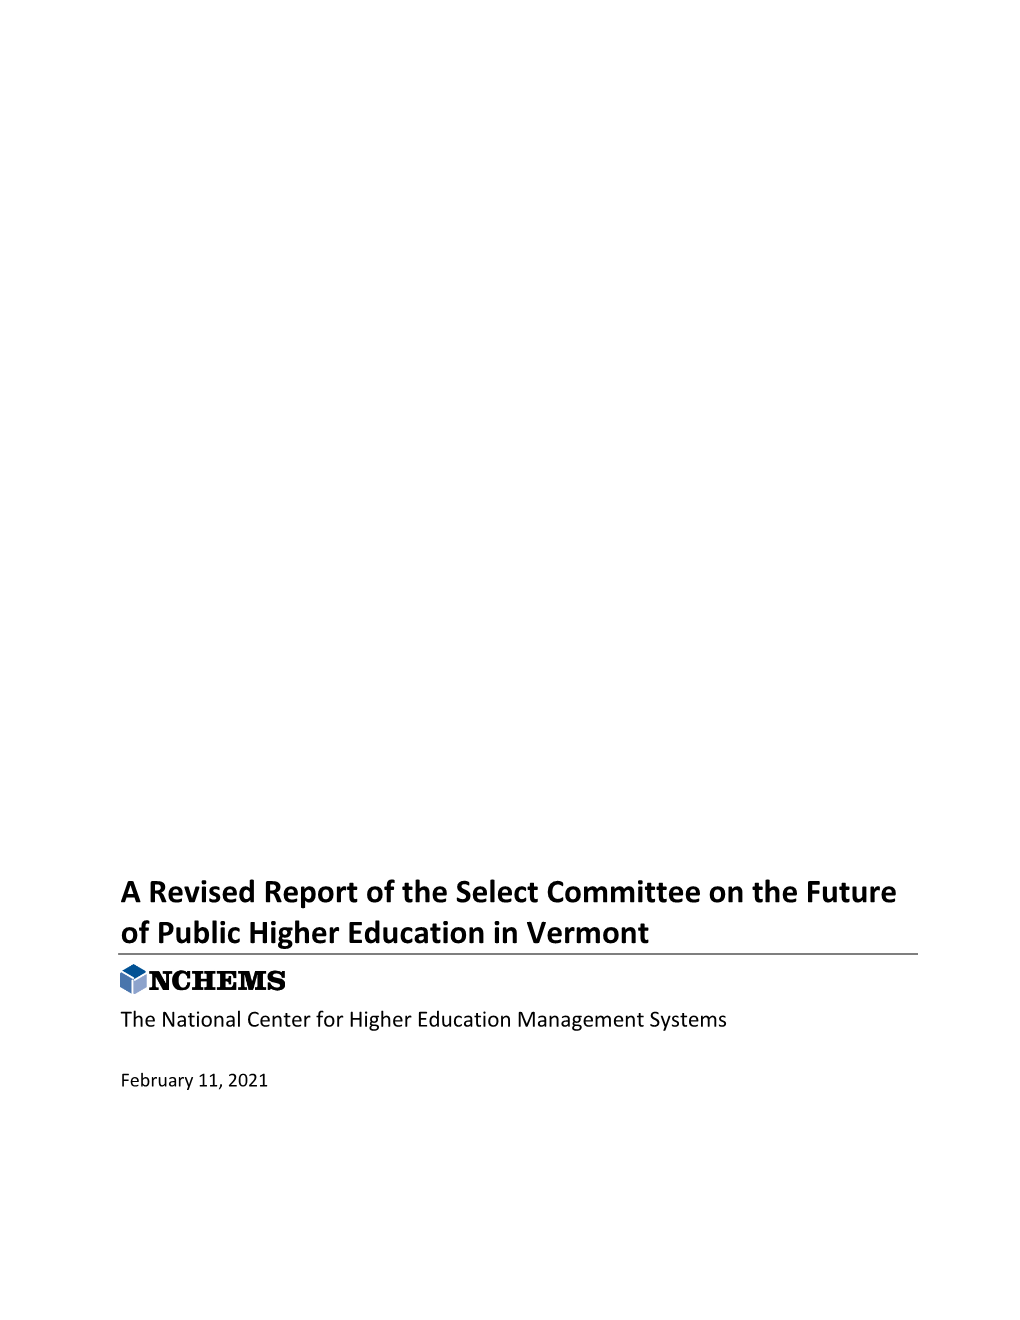 Select Committee on the Future of Public Higher Education in Vermont